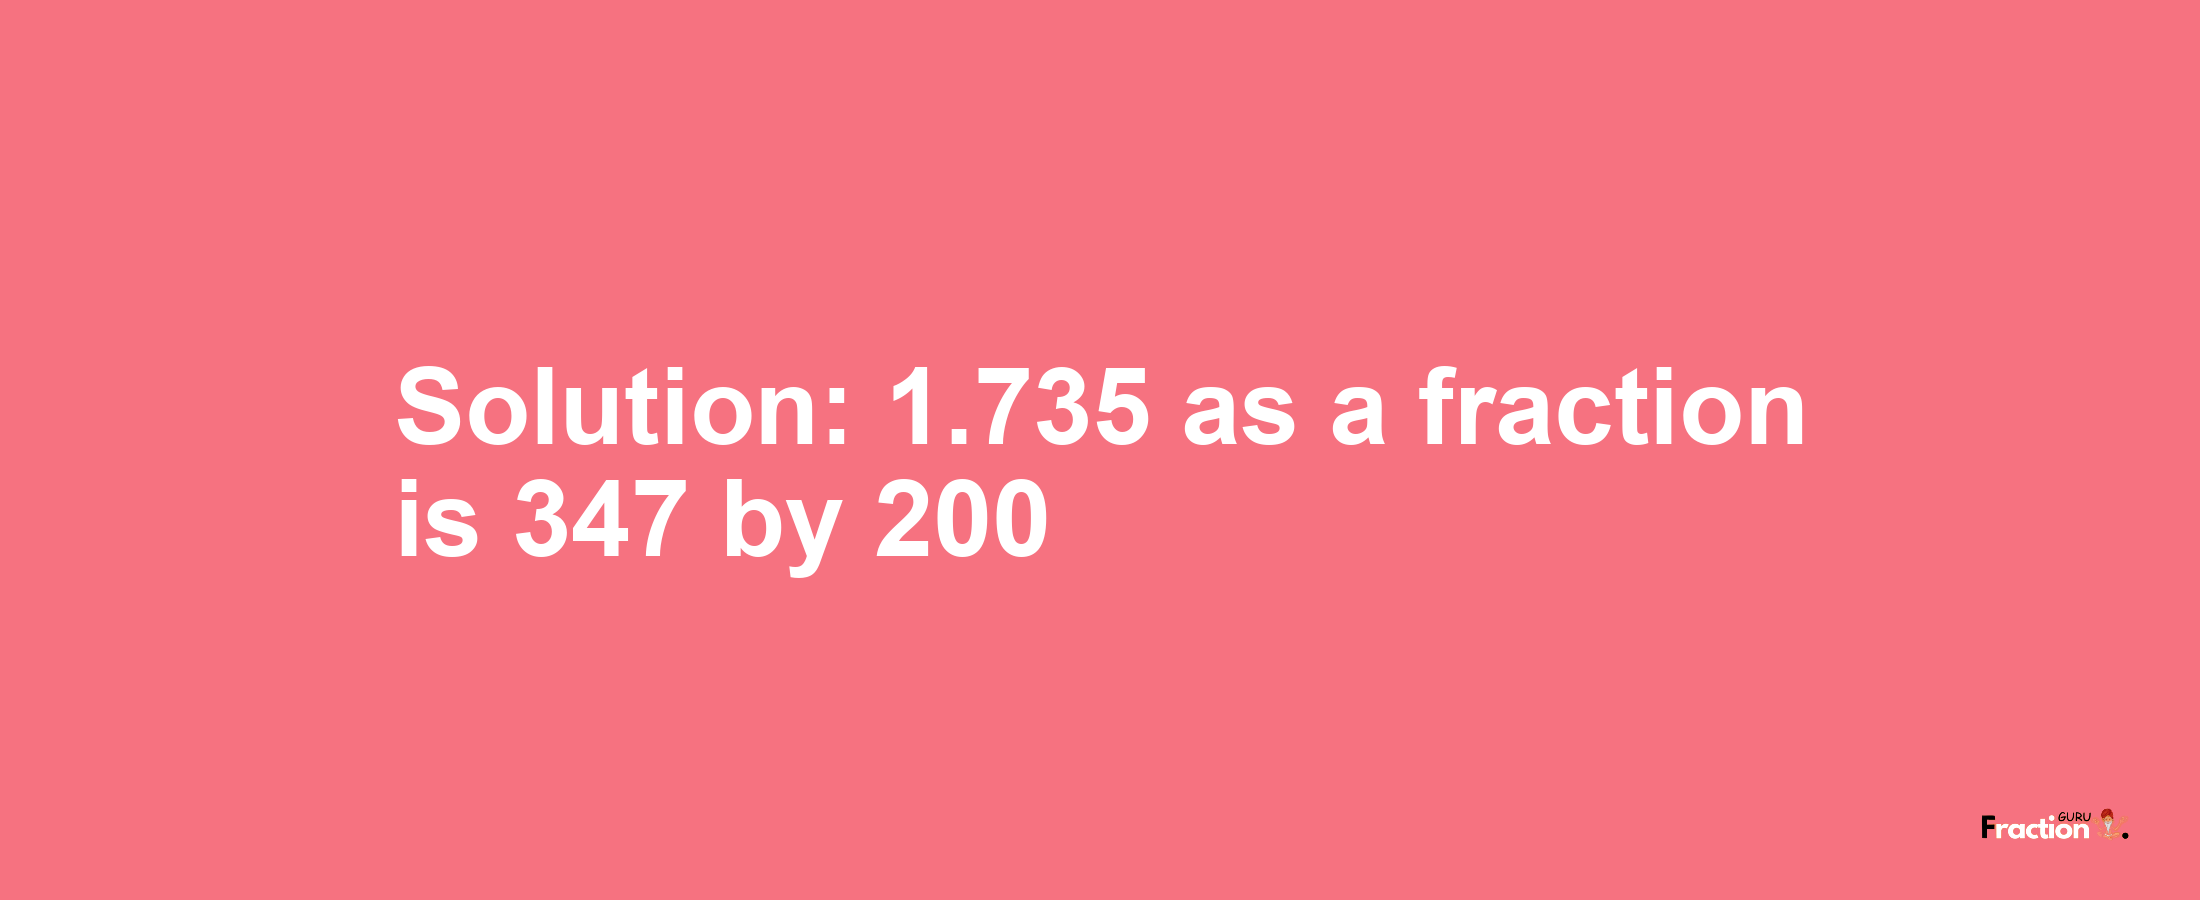 Solution:1.735 as a fraction is 347/200